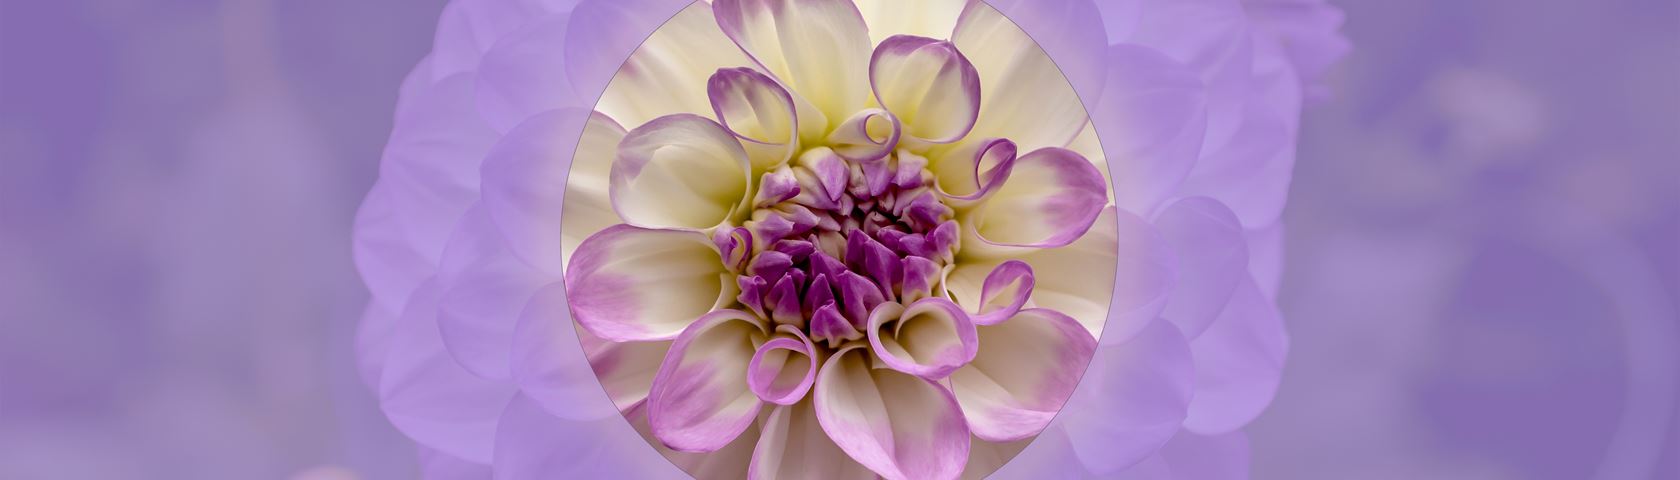 Dahlia with Lavender Background